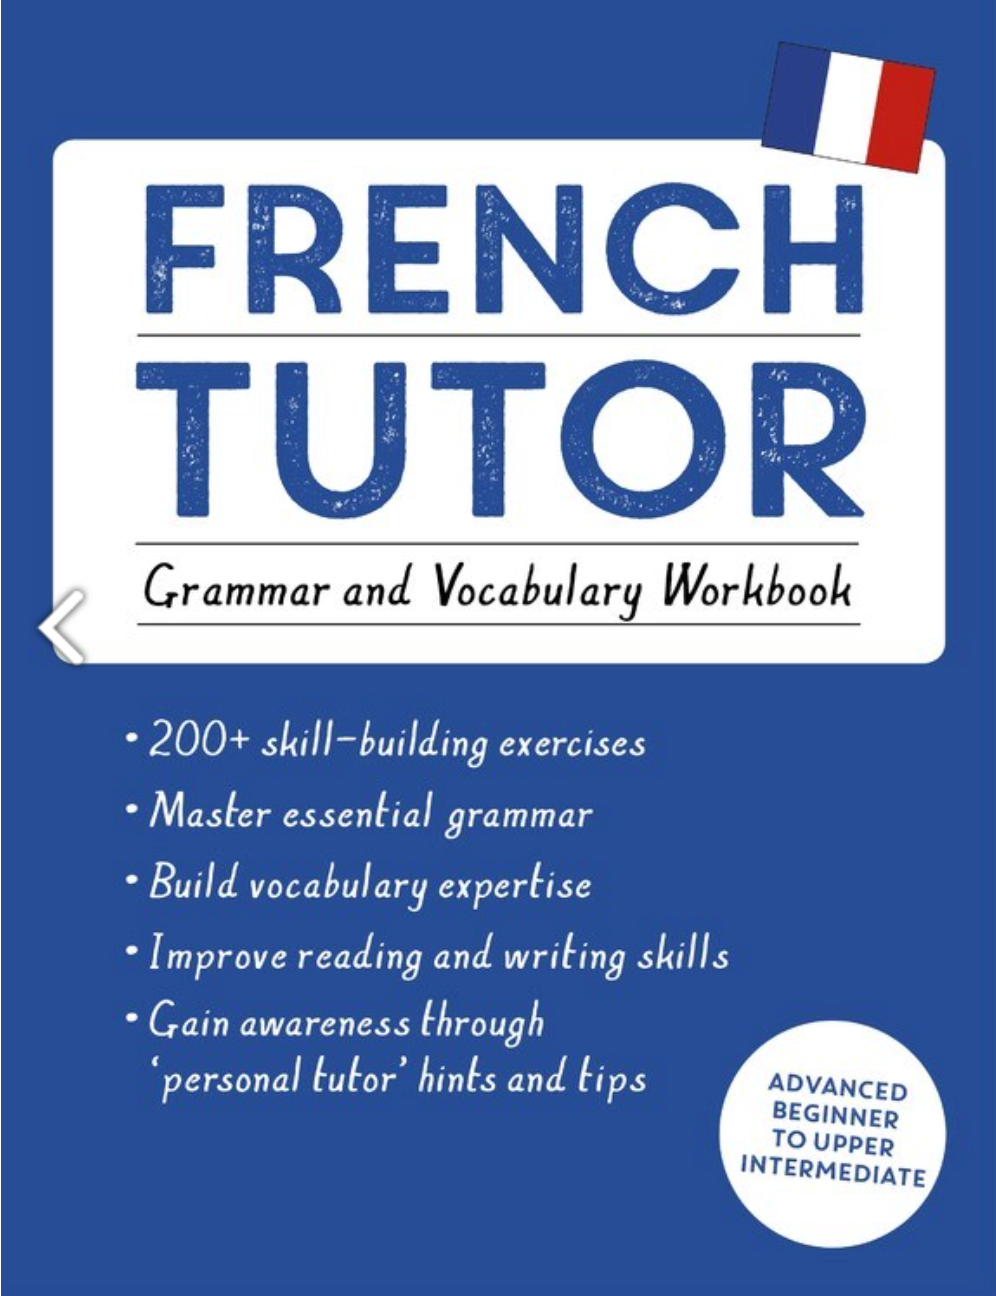 French Tutor: Grammar and Vocabulary Workbook (Learn French with Teach Yourself) : Advanced beginner to upper intermediate course